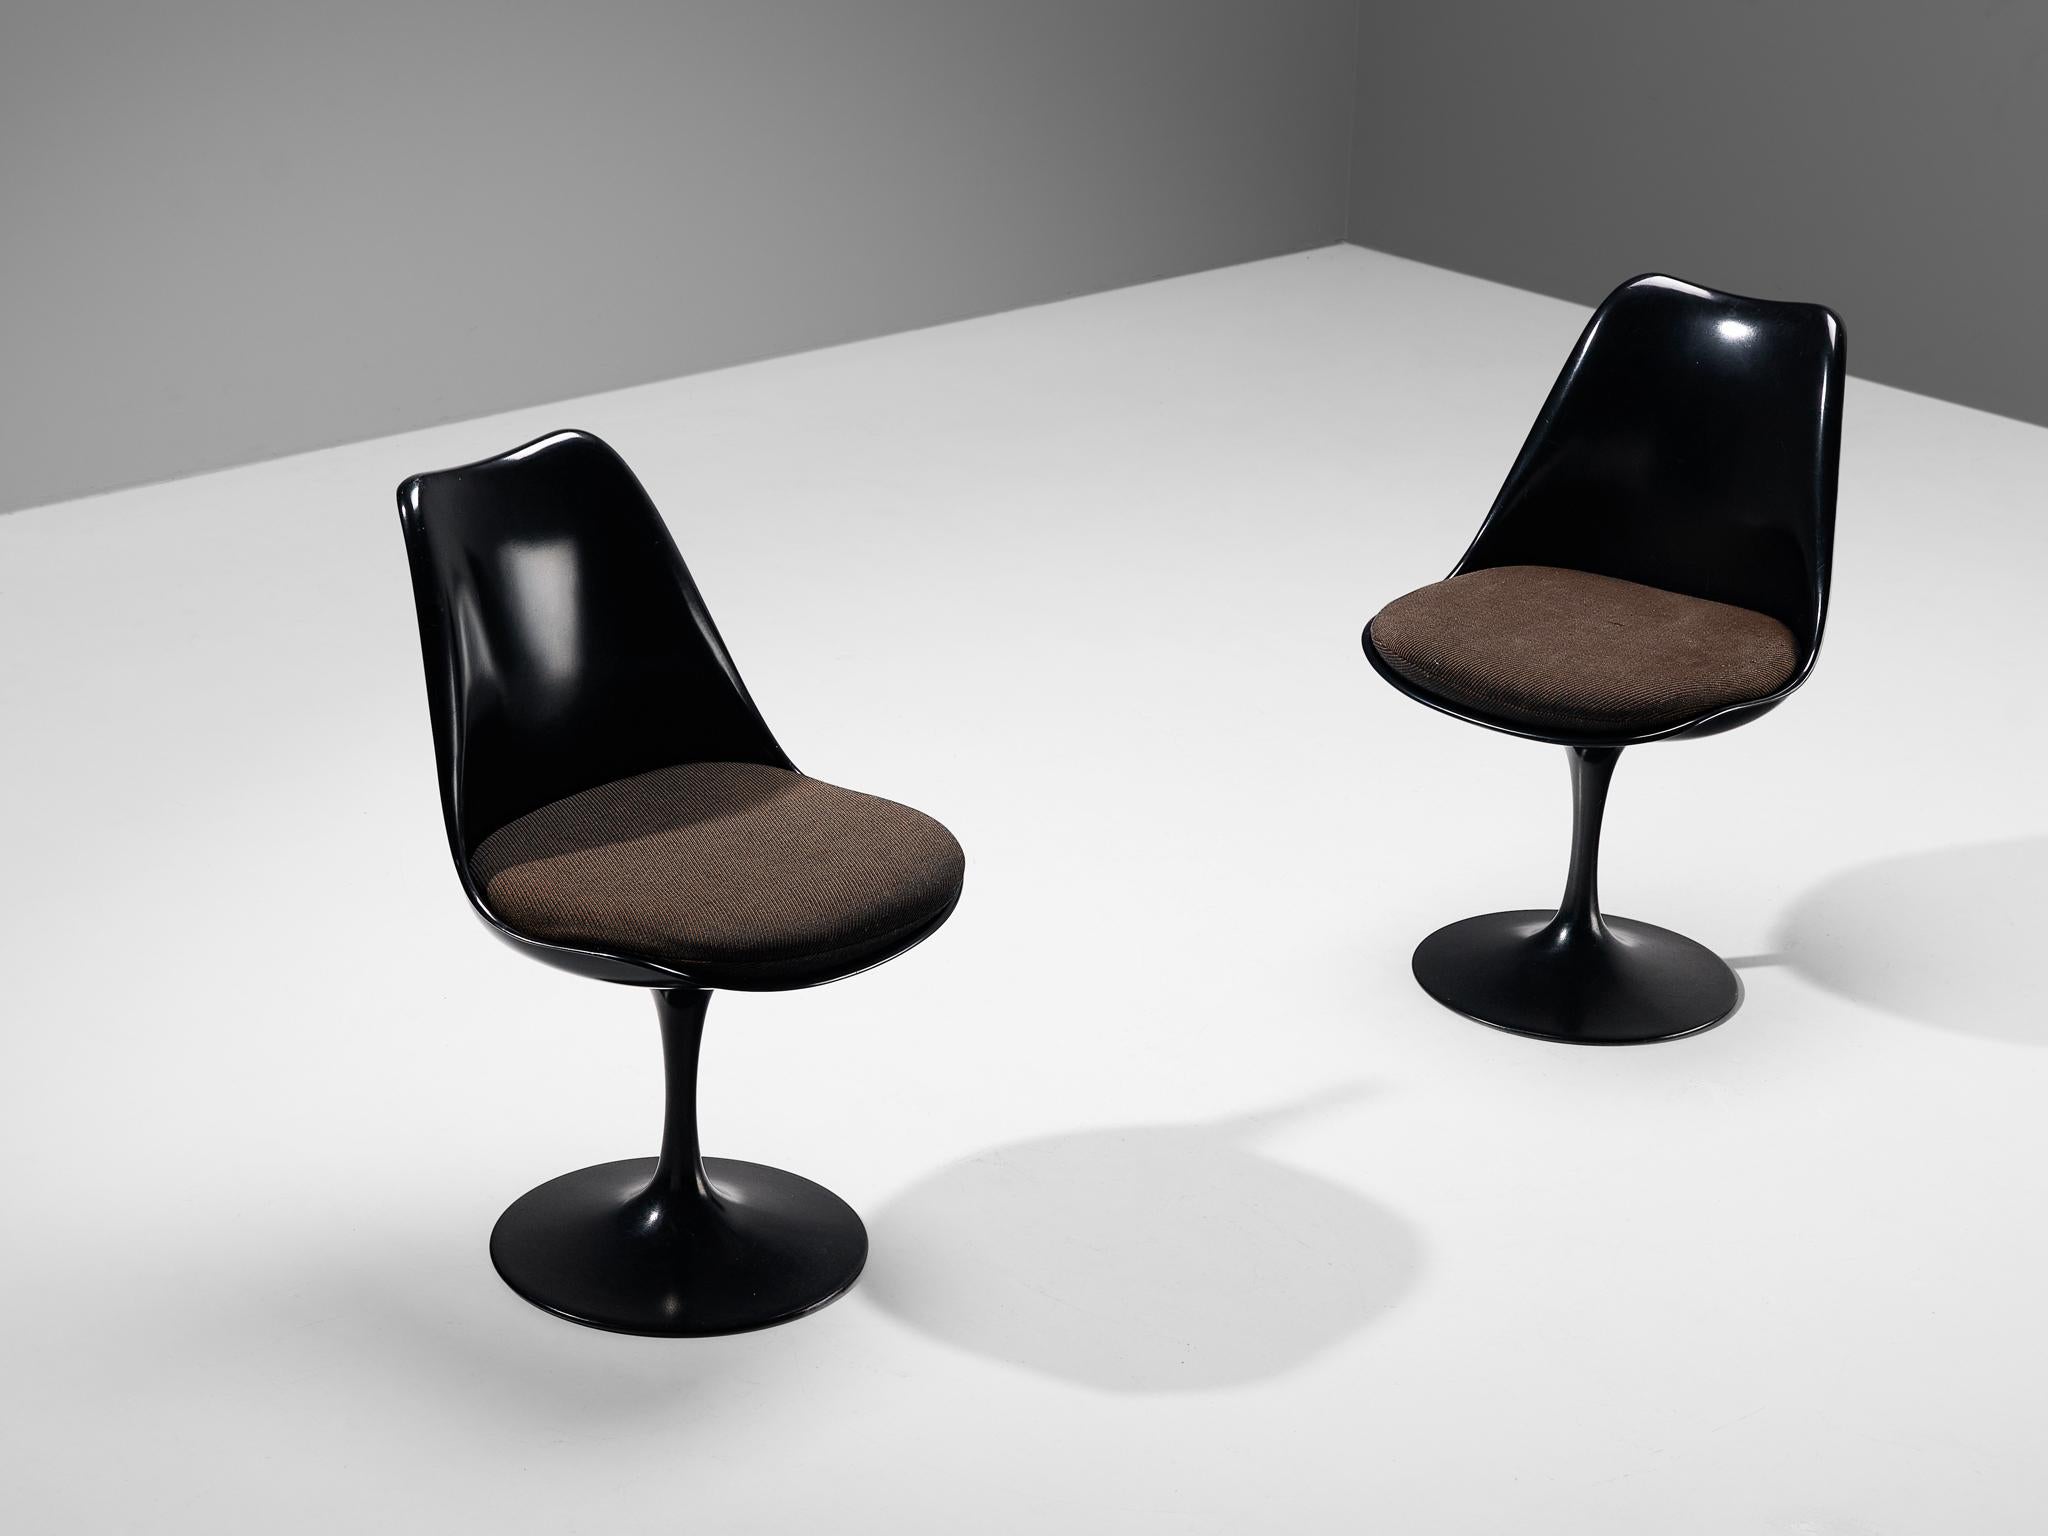 Eero Saarinen for Knoll, 'Tulip' pair of fixed dining chairs, model 151C, fiberglass, aluminum, fabric, United States, design 1955-57, production 1950s/1960s

This pair of dining chairs in black color is part of the 'Pedestal' collection which was